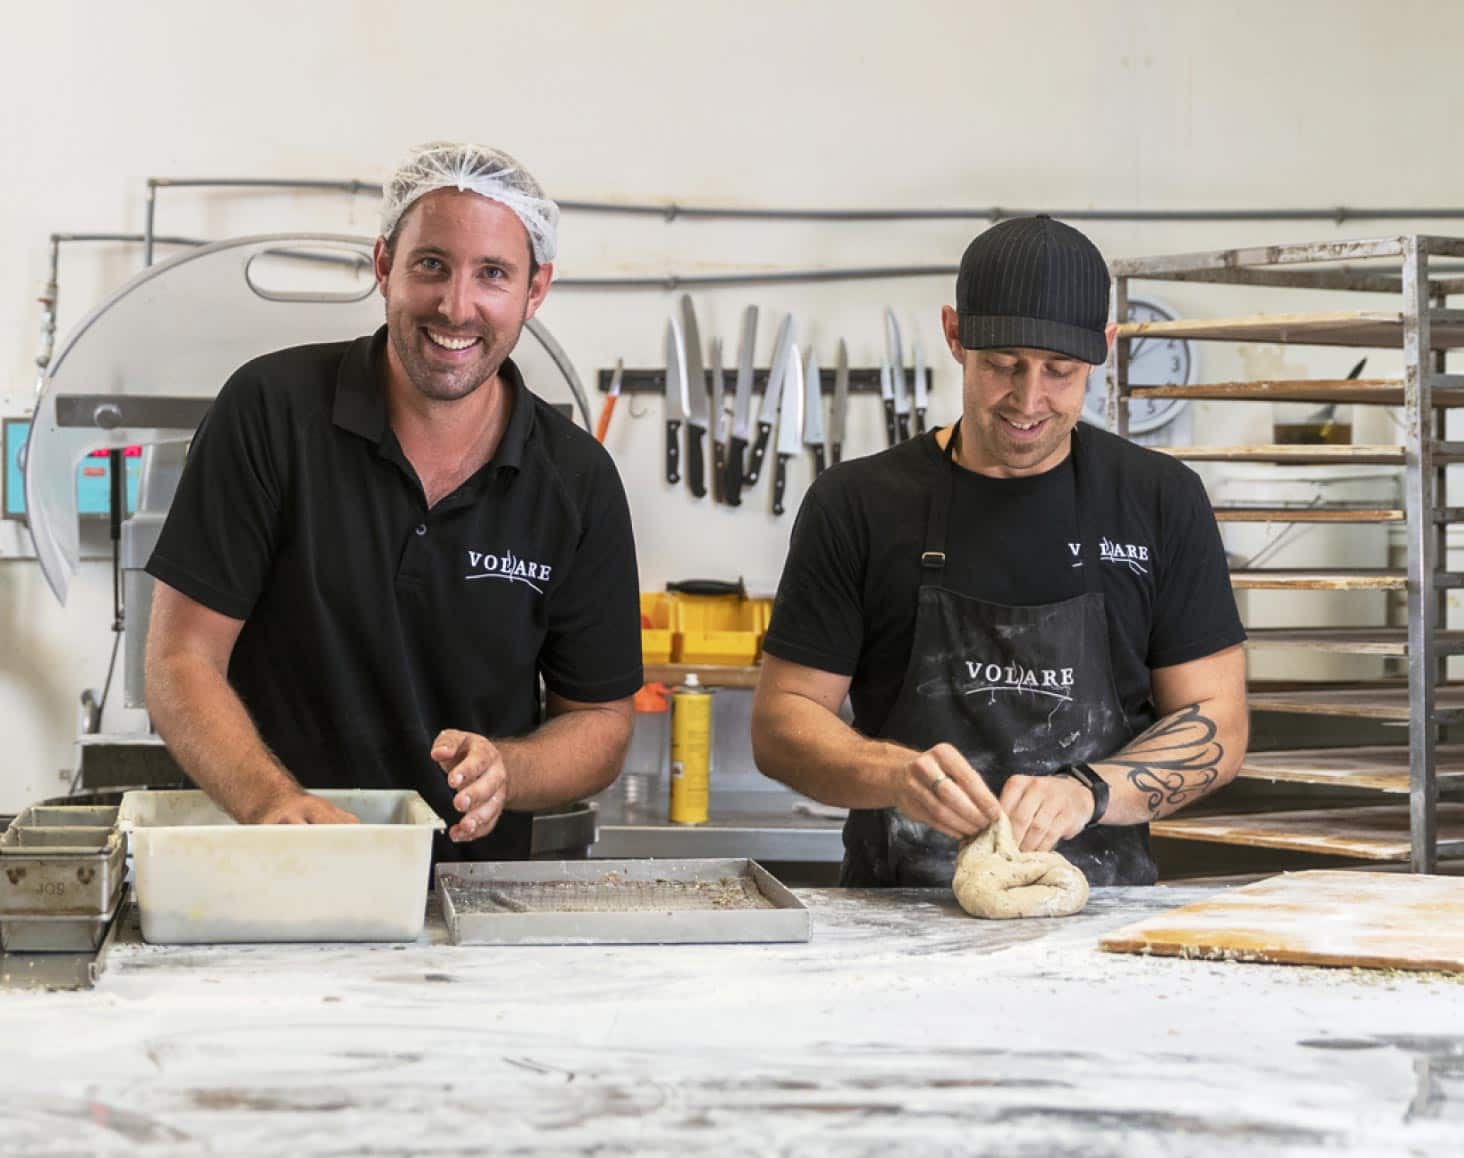 Ryan Simmons and Ed Hemming of artisanal bakery Volare prepare bread dough knowing their books are in order for EOFY.